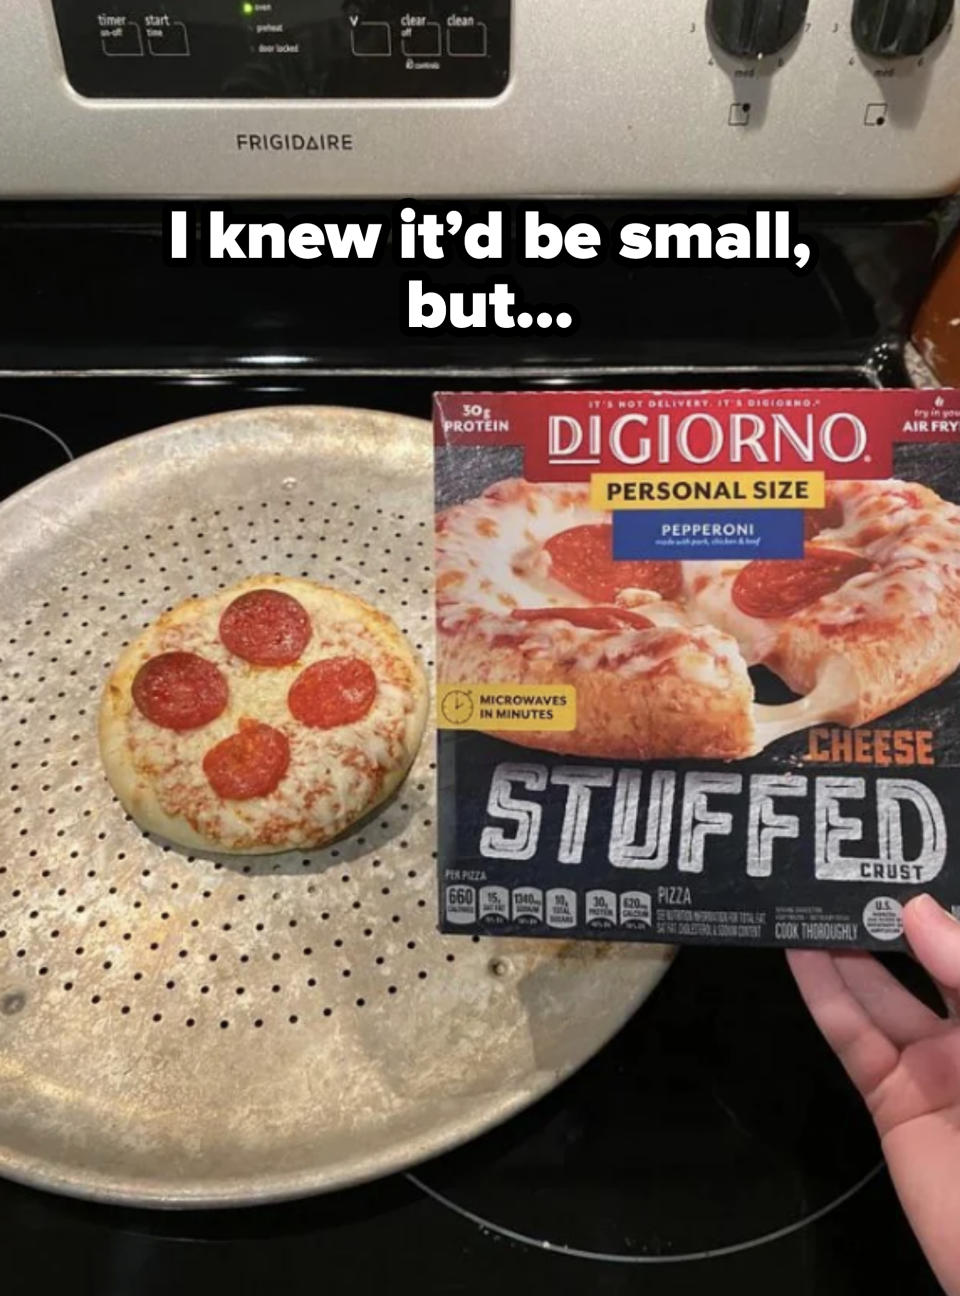 A hand holds a DiGiorno Personal Size Pepperoni Cheese Stuffed Crust Pizza box above a cooked pepperoni pizza placed on a perforated tray